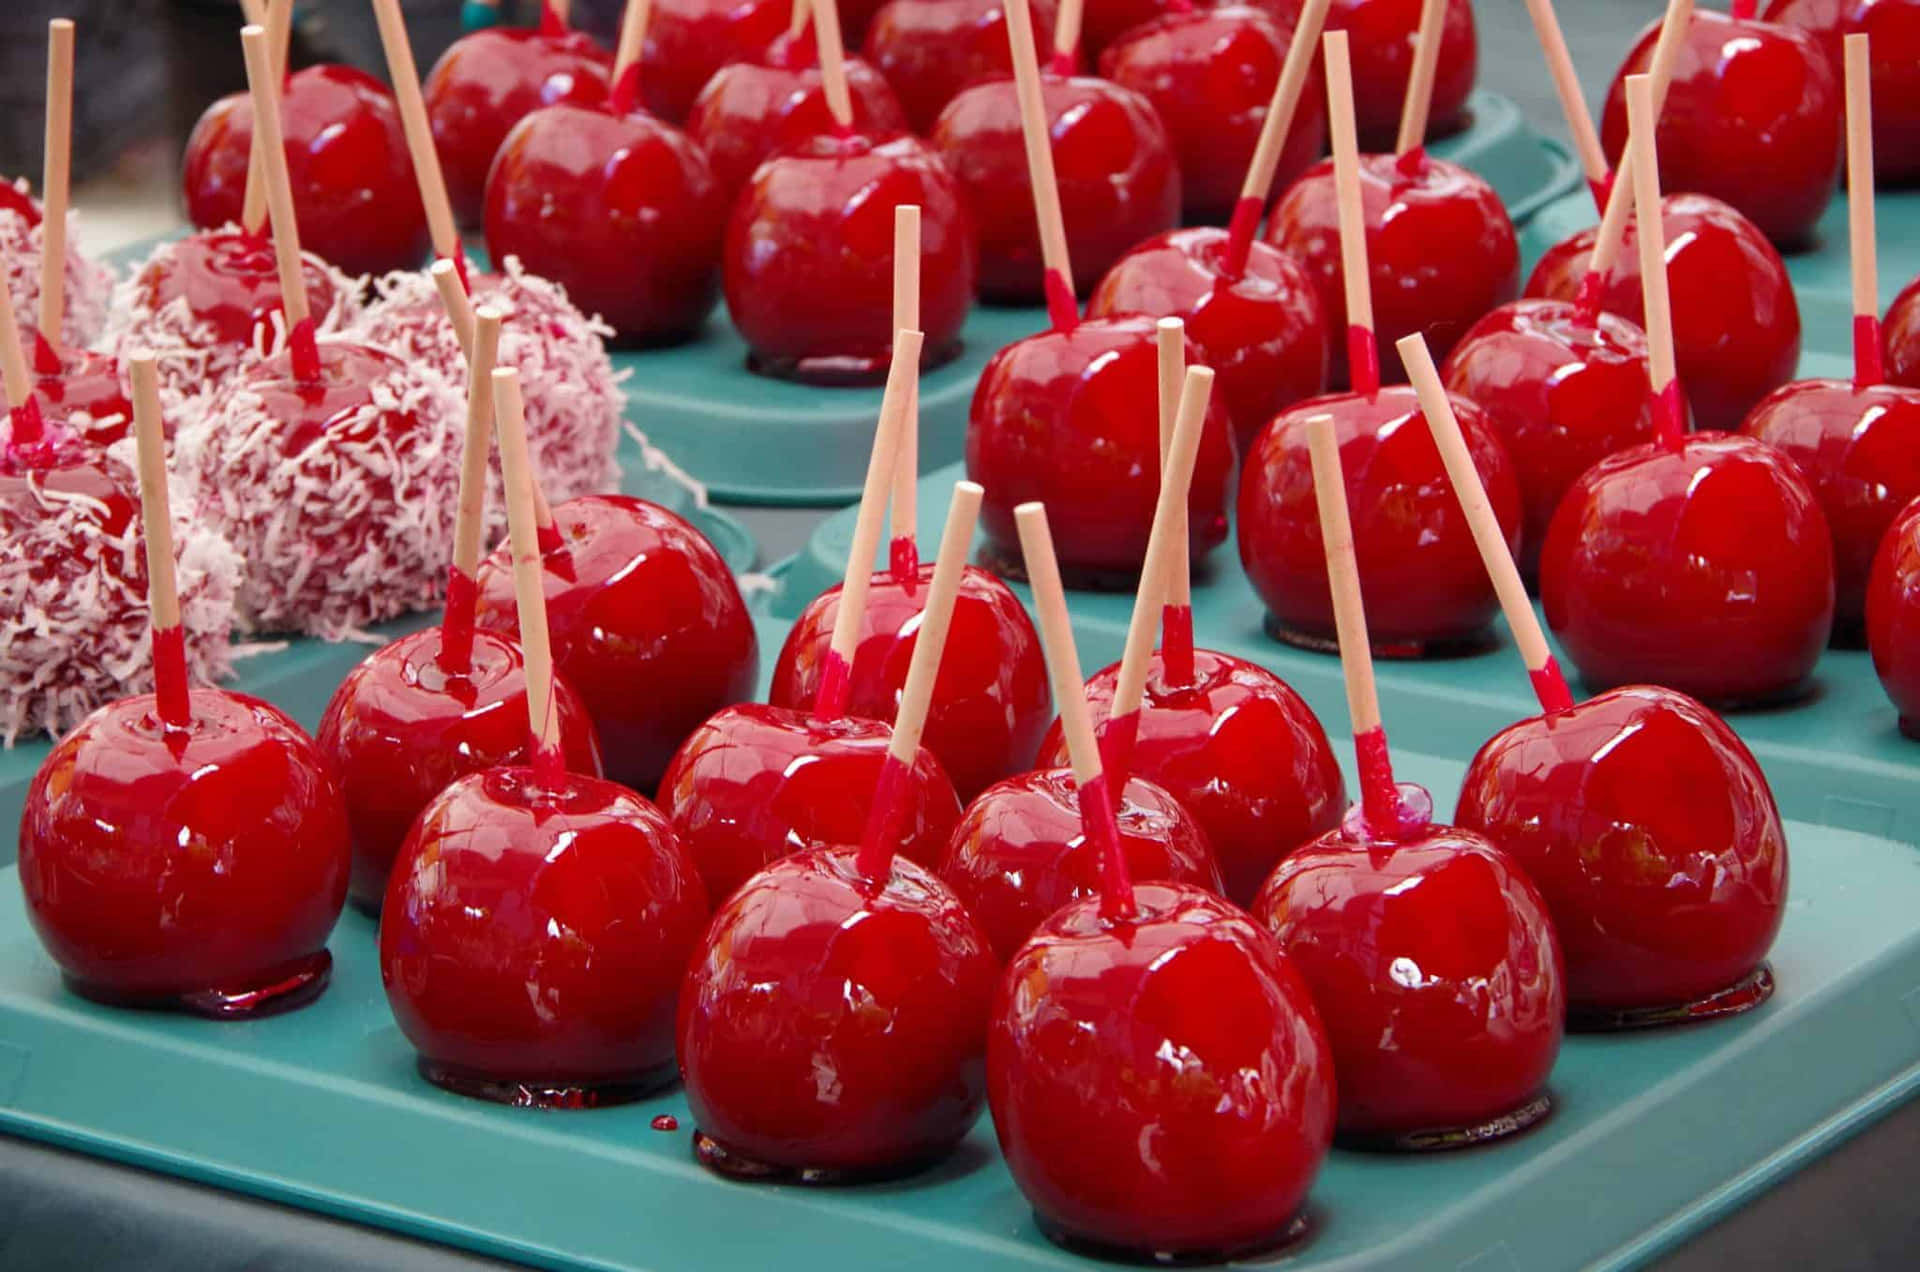 Vibrant Candy Apples On Display Wallpaper